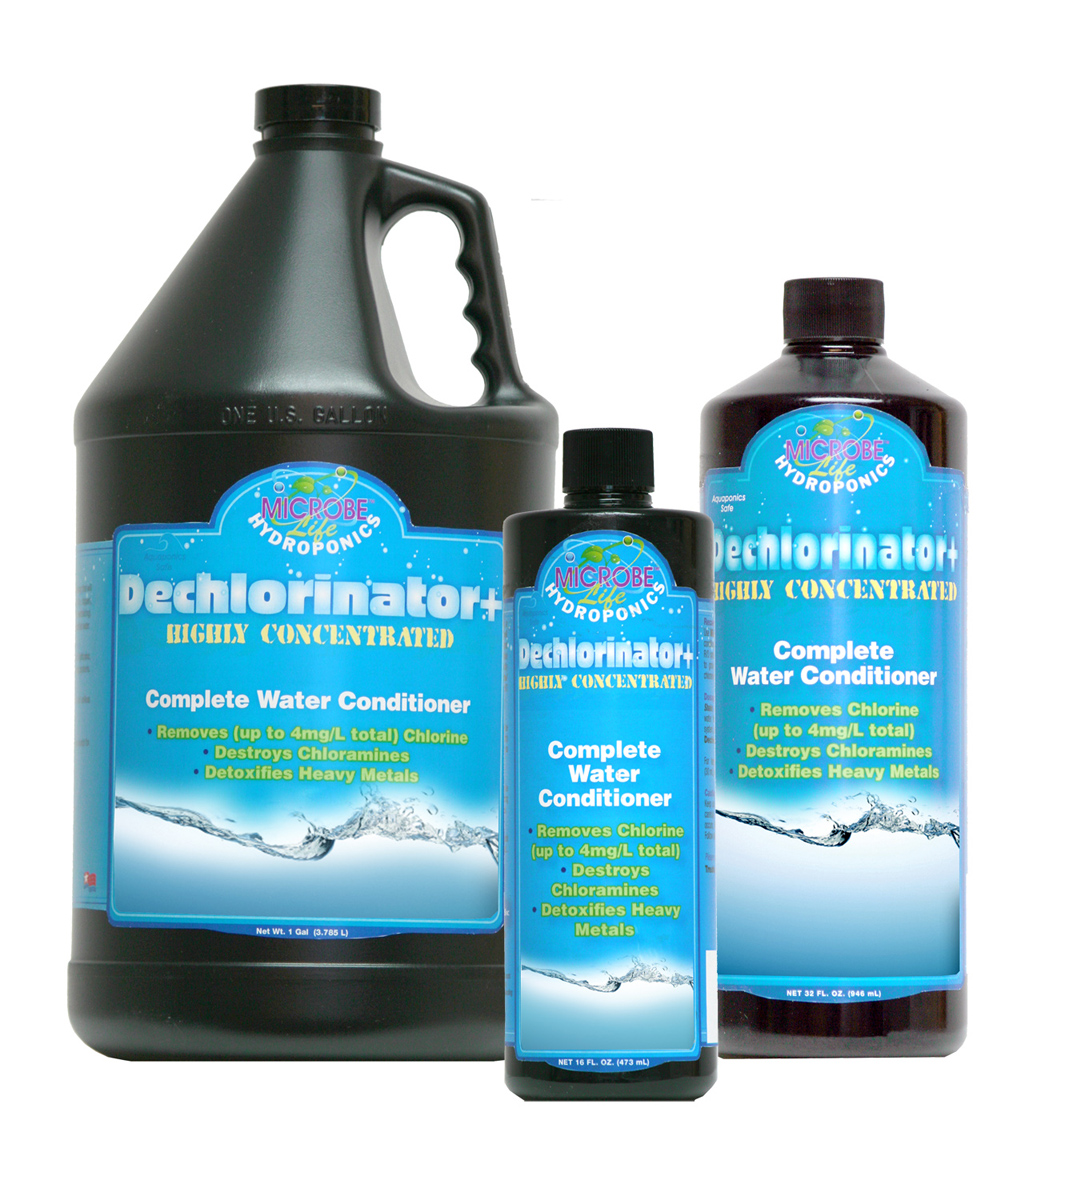 Picture for Microbe Life Dechlorinator +, 1 qt